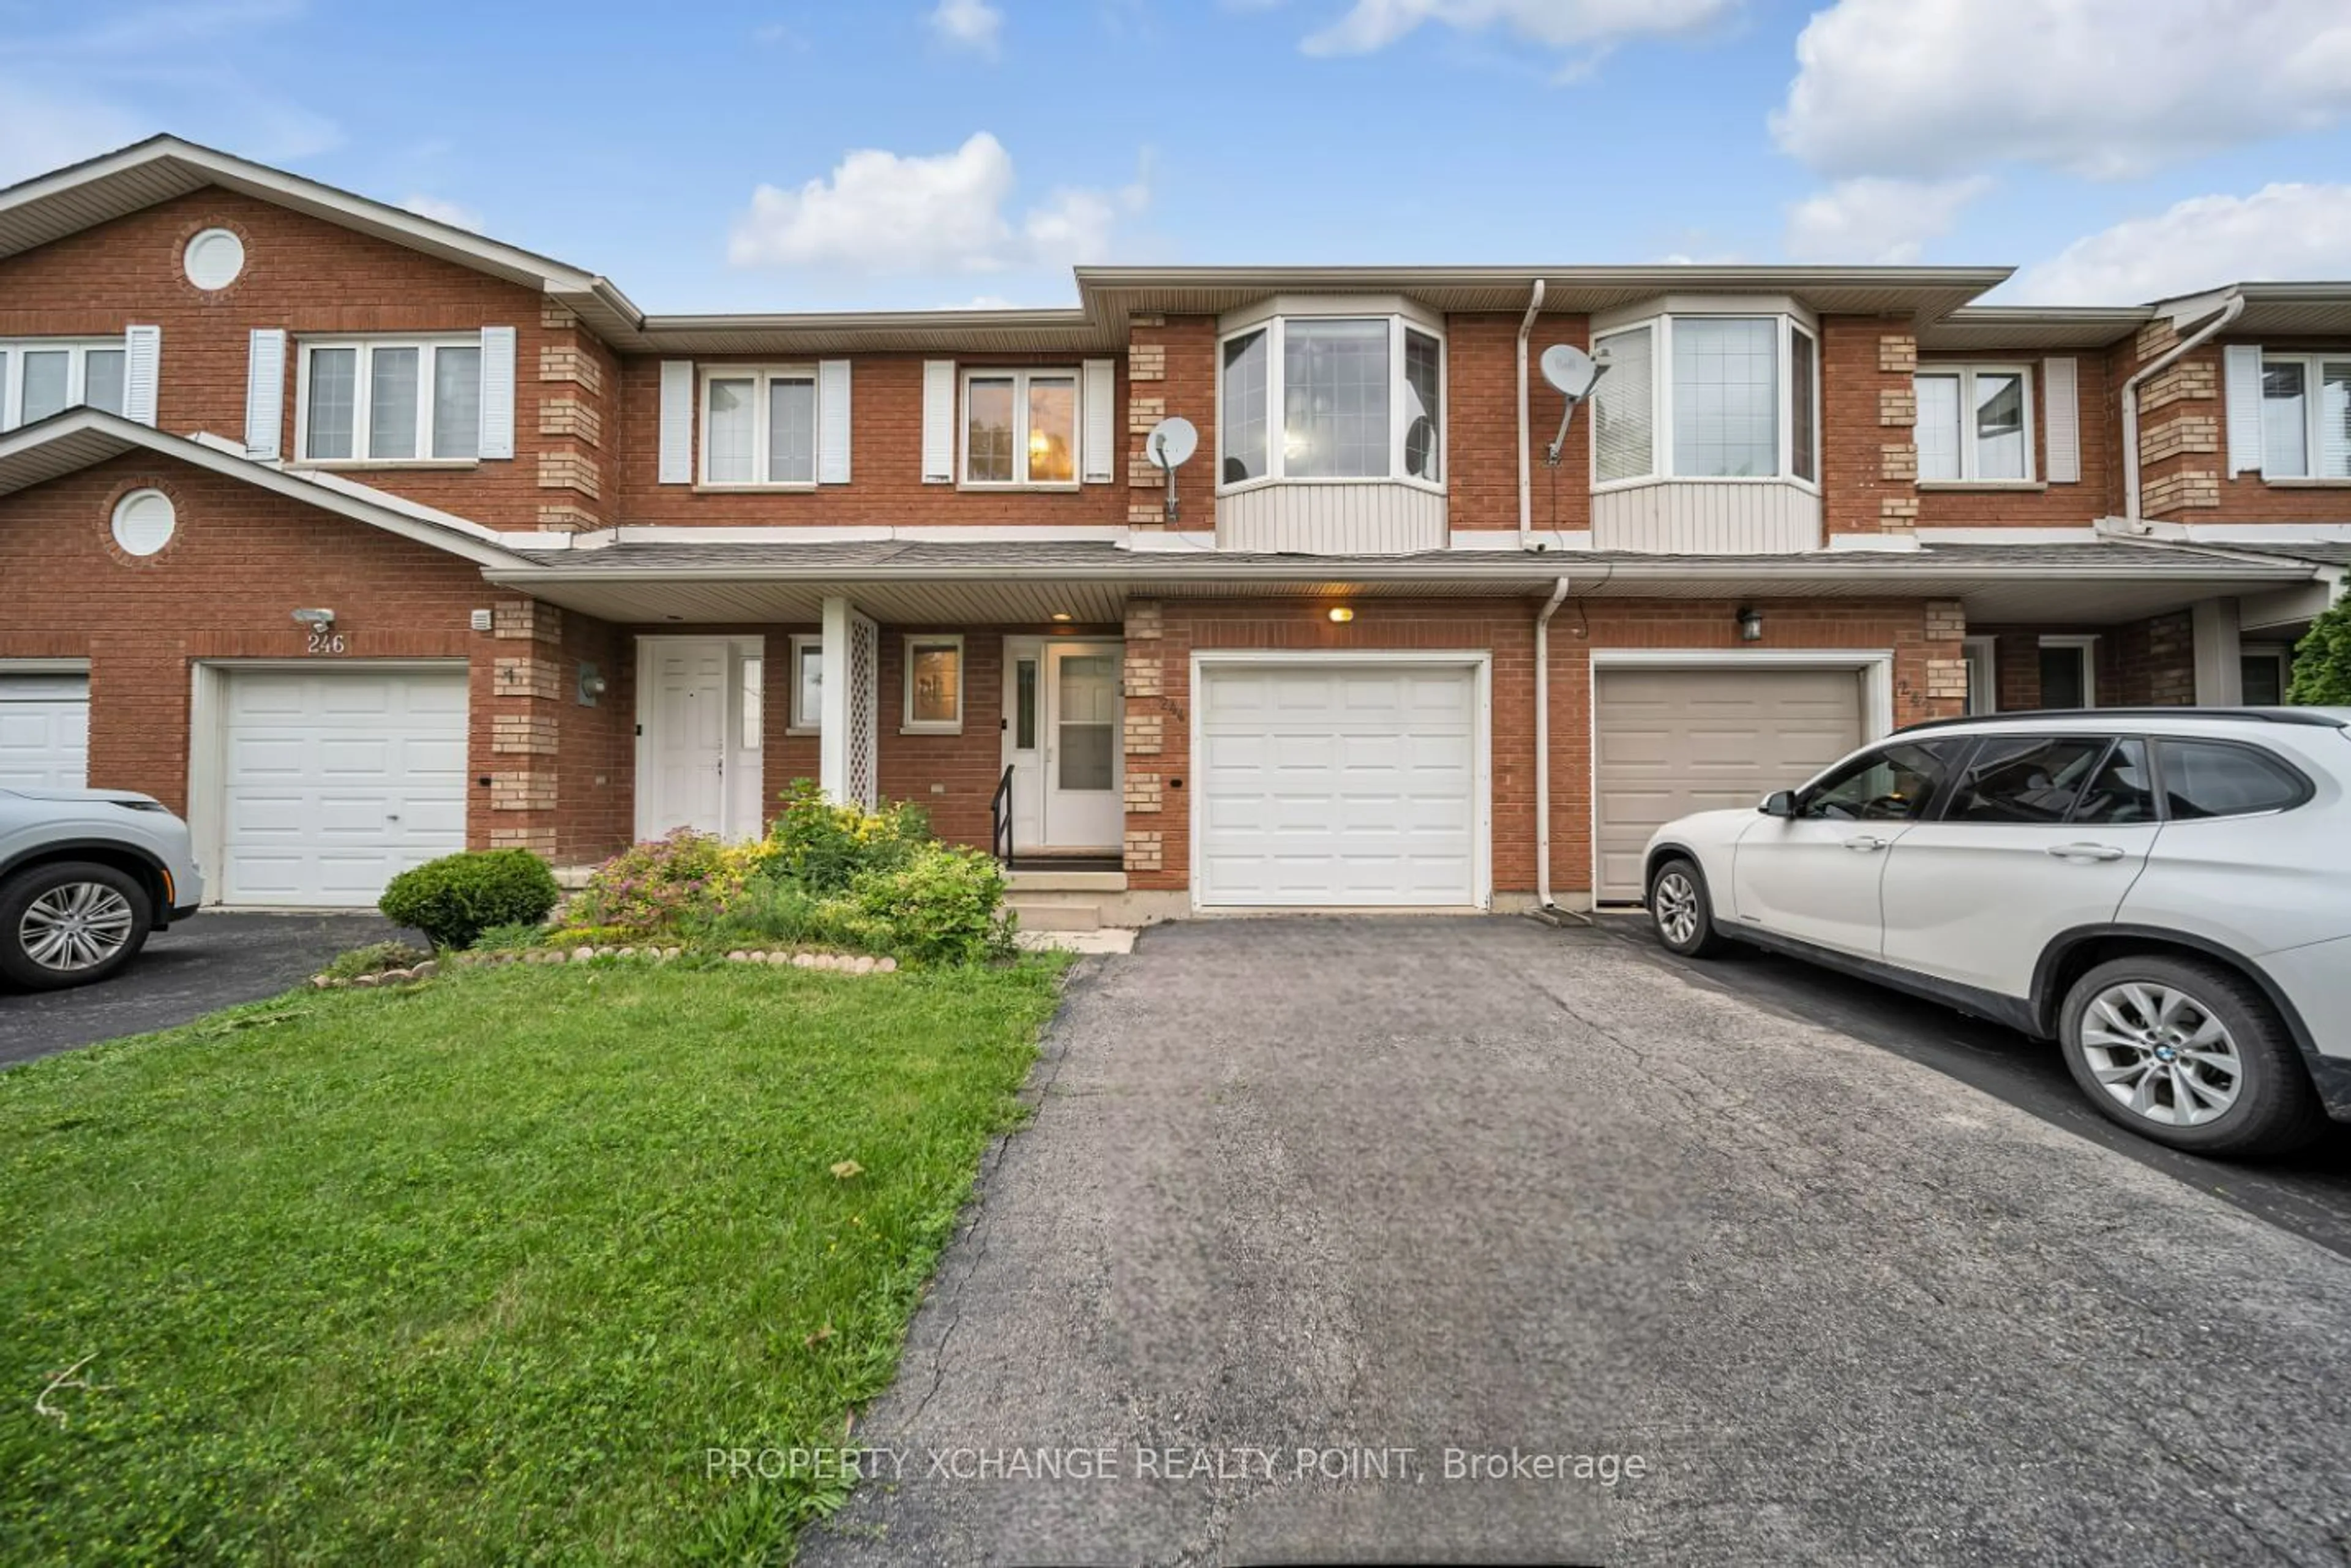 A pic from exterior of the house or condo for 244 Candlewood Dr, Hamilton Ontario L8J 3P6